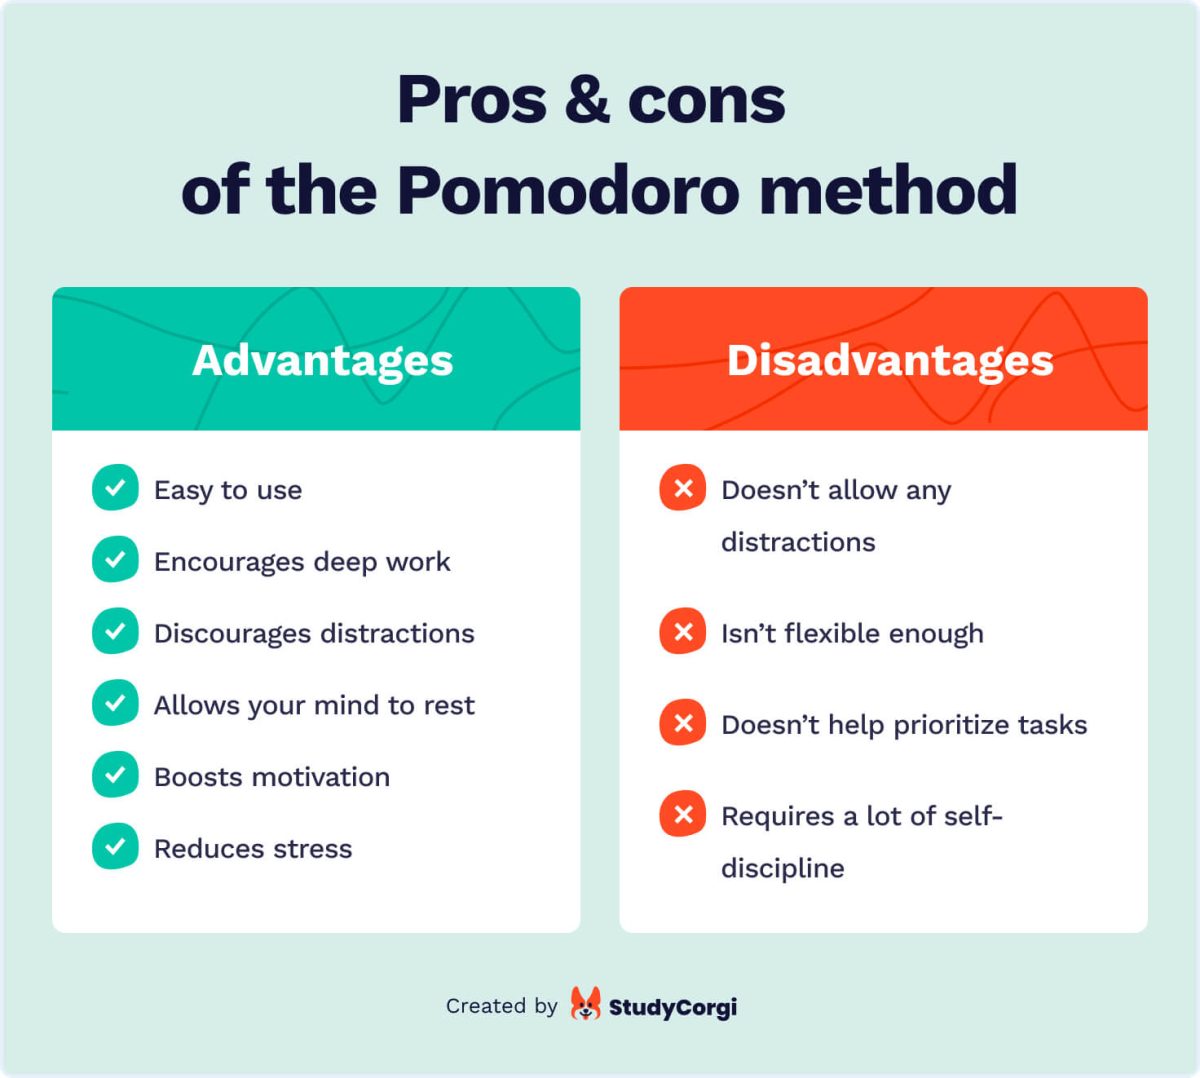 The picture lists the pros and cons of the Pomodoro method.